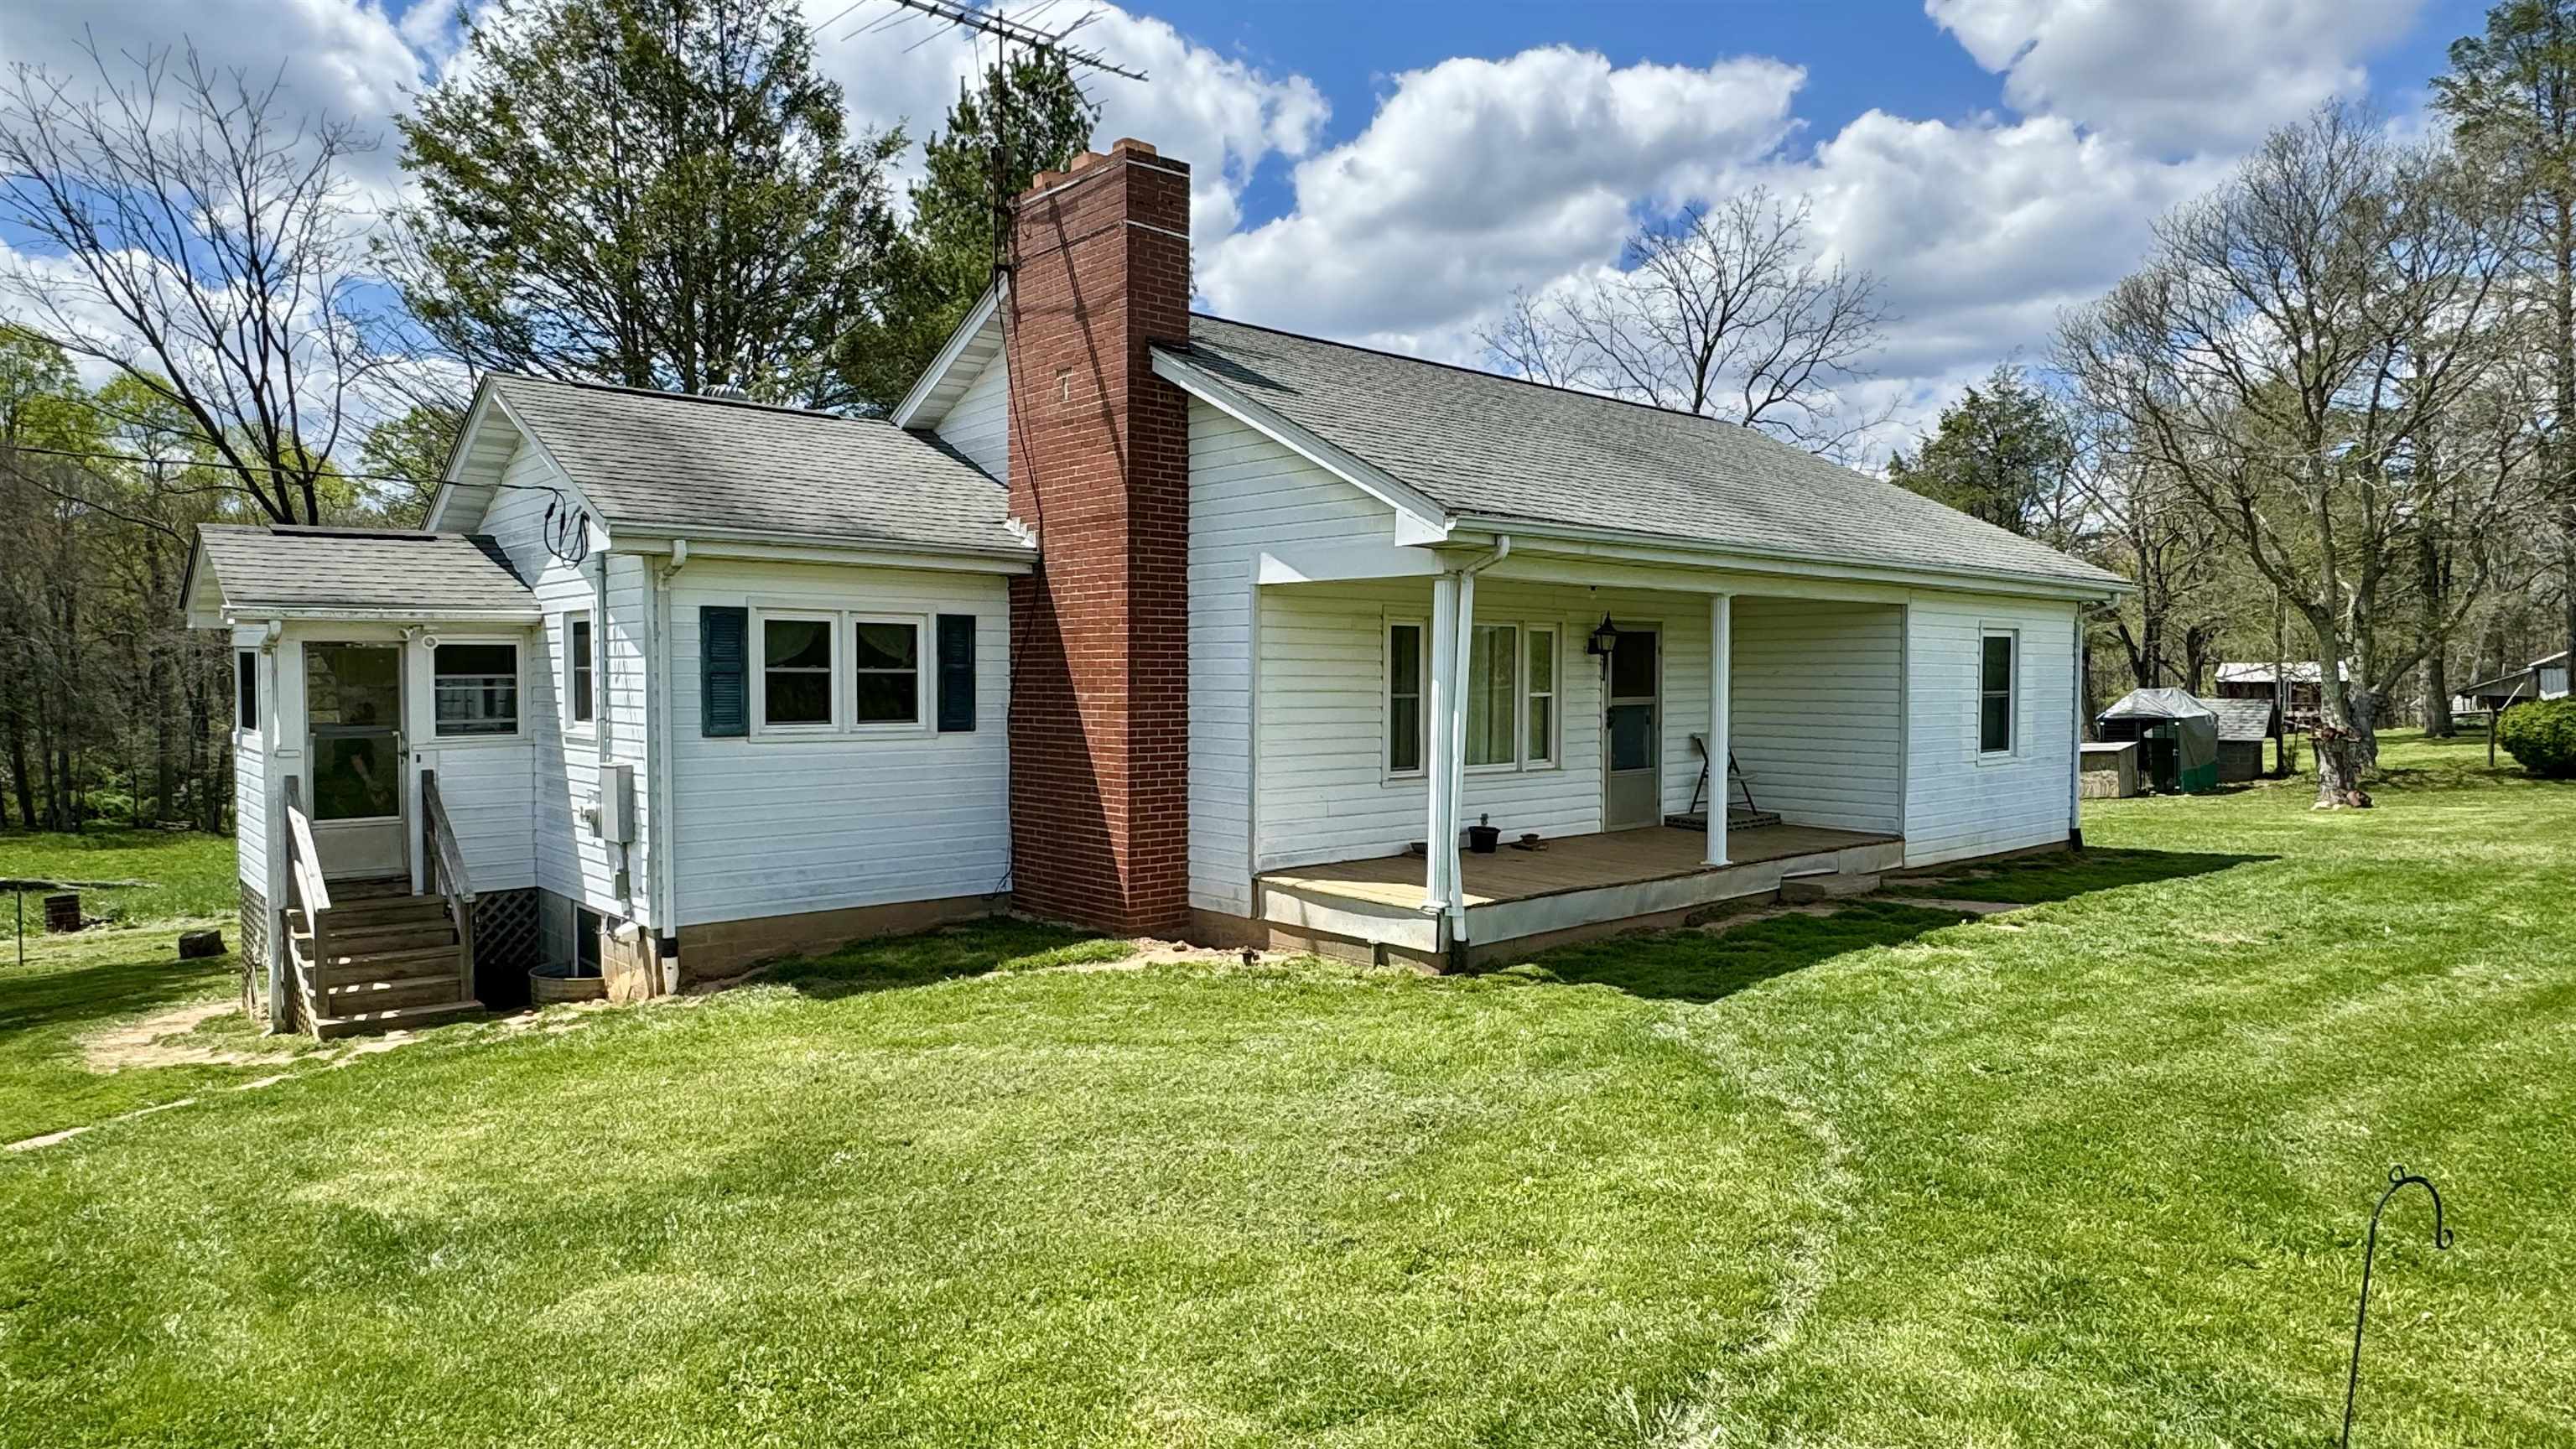 Great potential just off the Blue Ridge Parkway (~0.1 miles away)! This 3BR, 1 BA home offers wood floors, a full walkout basement, upstairs storage, an RV hookup, numerous outbuildings and ~2.75 acres. Updated electric panel box, laundry in basement, covered front porch, and a nice mix of open yard and woods are also included. Take a look at the photos and schedule your appointment today!